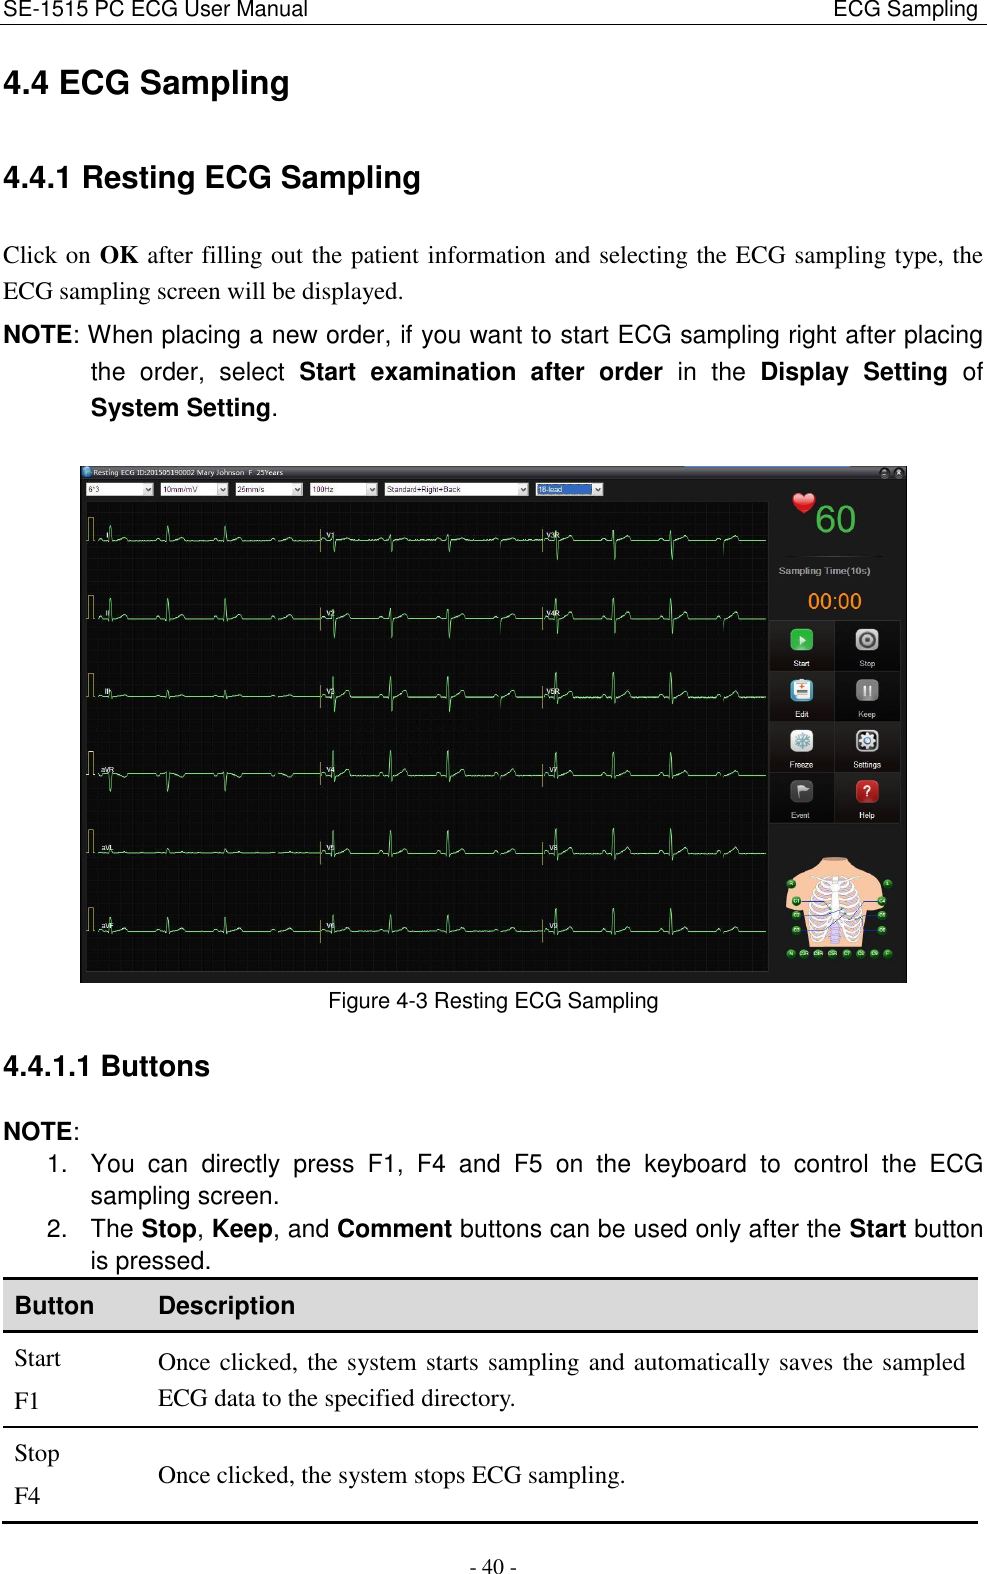 SE-1515 PC ECG User Manual                                                                                              ECG Sampling - 40 - 4.4 ECG Sampling 4.4.1 Resting ECG Sampling Click on OK after filling out the patient information and selecting the ECG sampling type, the ECG sampling screen will be displayed. NOTE: When placing a new order, if you want to start ECG sampling right after placing the  order,  select  Start  examination  after  order  in  the  Display  Setting  of System Setting.   Figure 4-3 Resting ECG Sampling 4.4.1.1 Buttons NOTE:   1.  You  can  directly  press  F1,  F4  and  F5  on  the  keyboard  to  control  the  ECG sampling screen. 2.  The Stop, Keep, and Comment buttons can be used only after the Start button is pressed. Button Description Start F1 Once clicked, the system starts sampling and automatically saves the sampled ECG data to the specified directory. Stop F4 Once clicked, the system stops ECG sampling. 